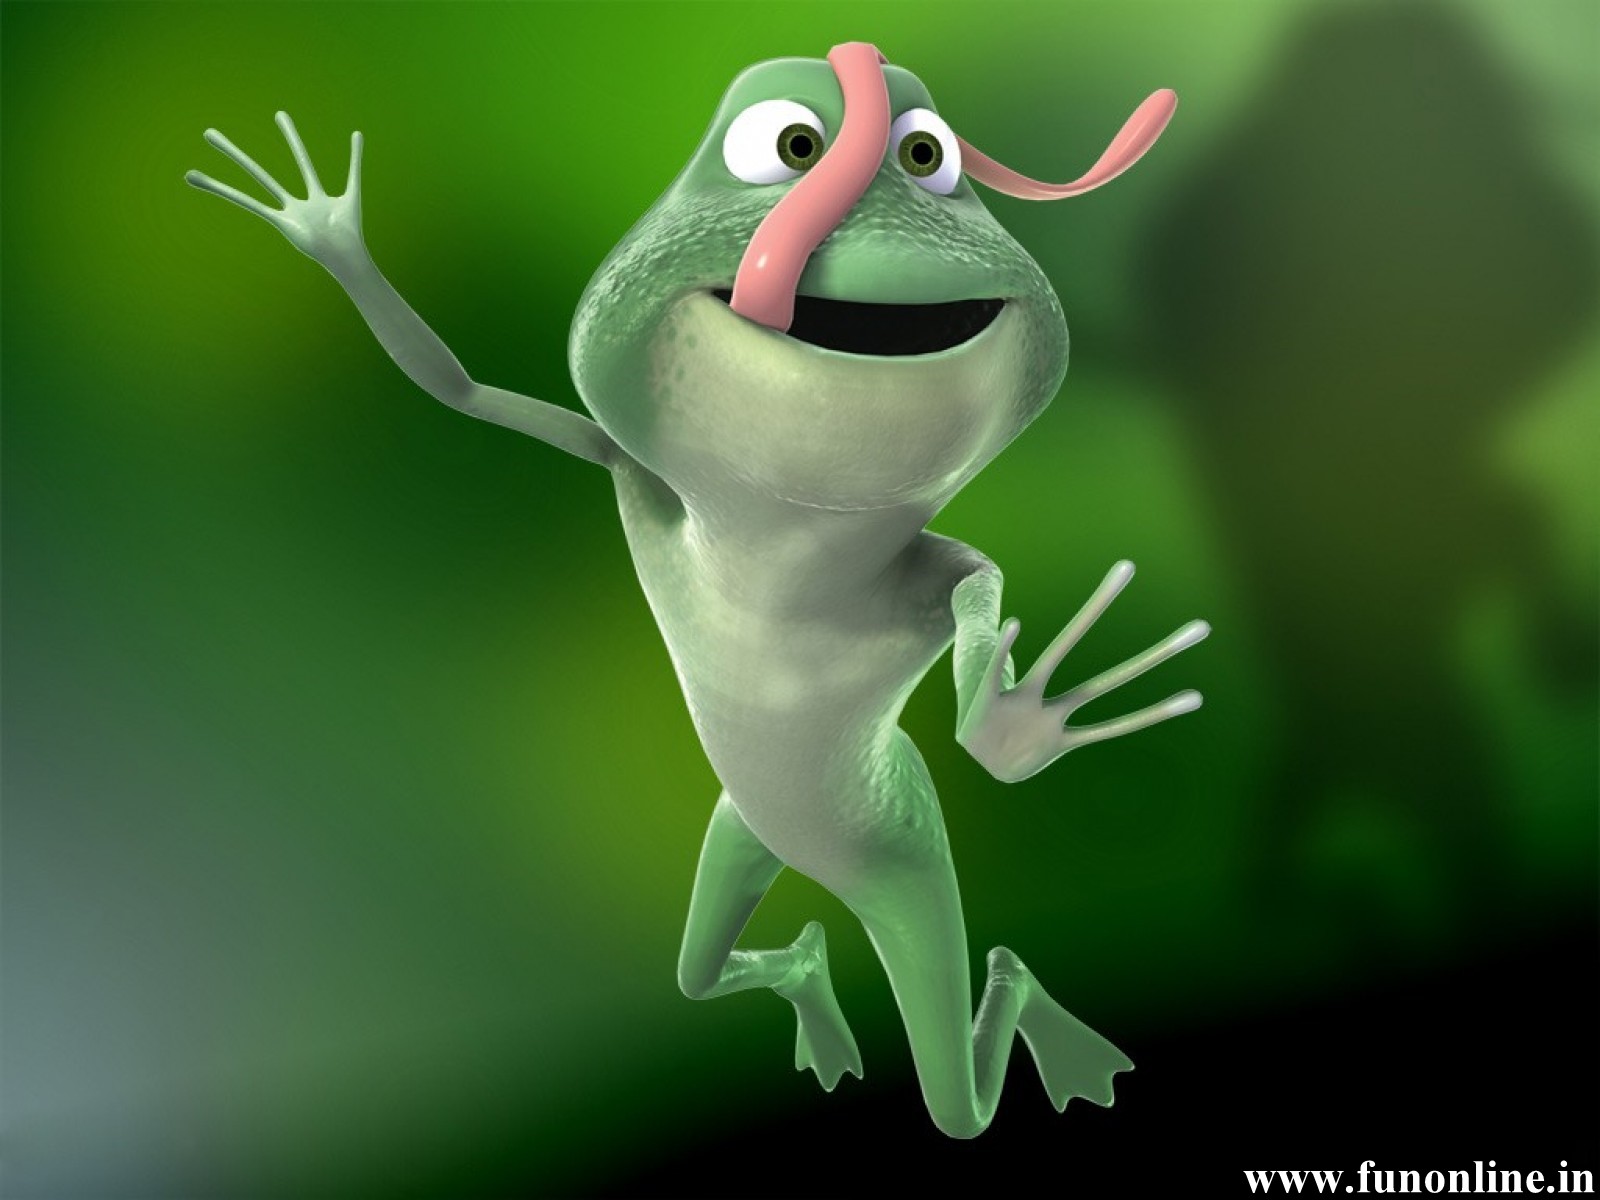 Frog Wallpapers Download Bullfrog and Moss Frogs HD Wallpaper 1600x1200